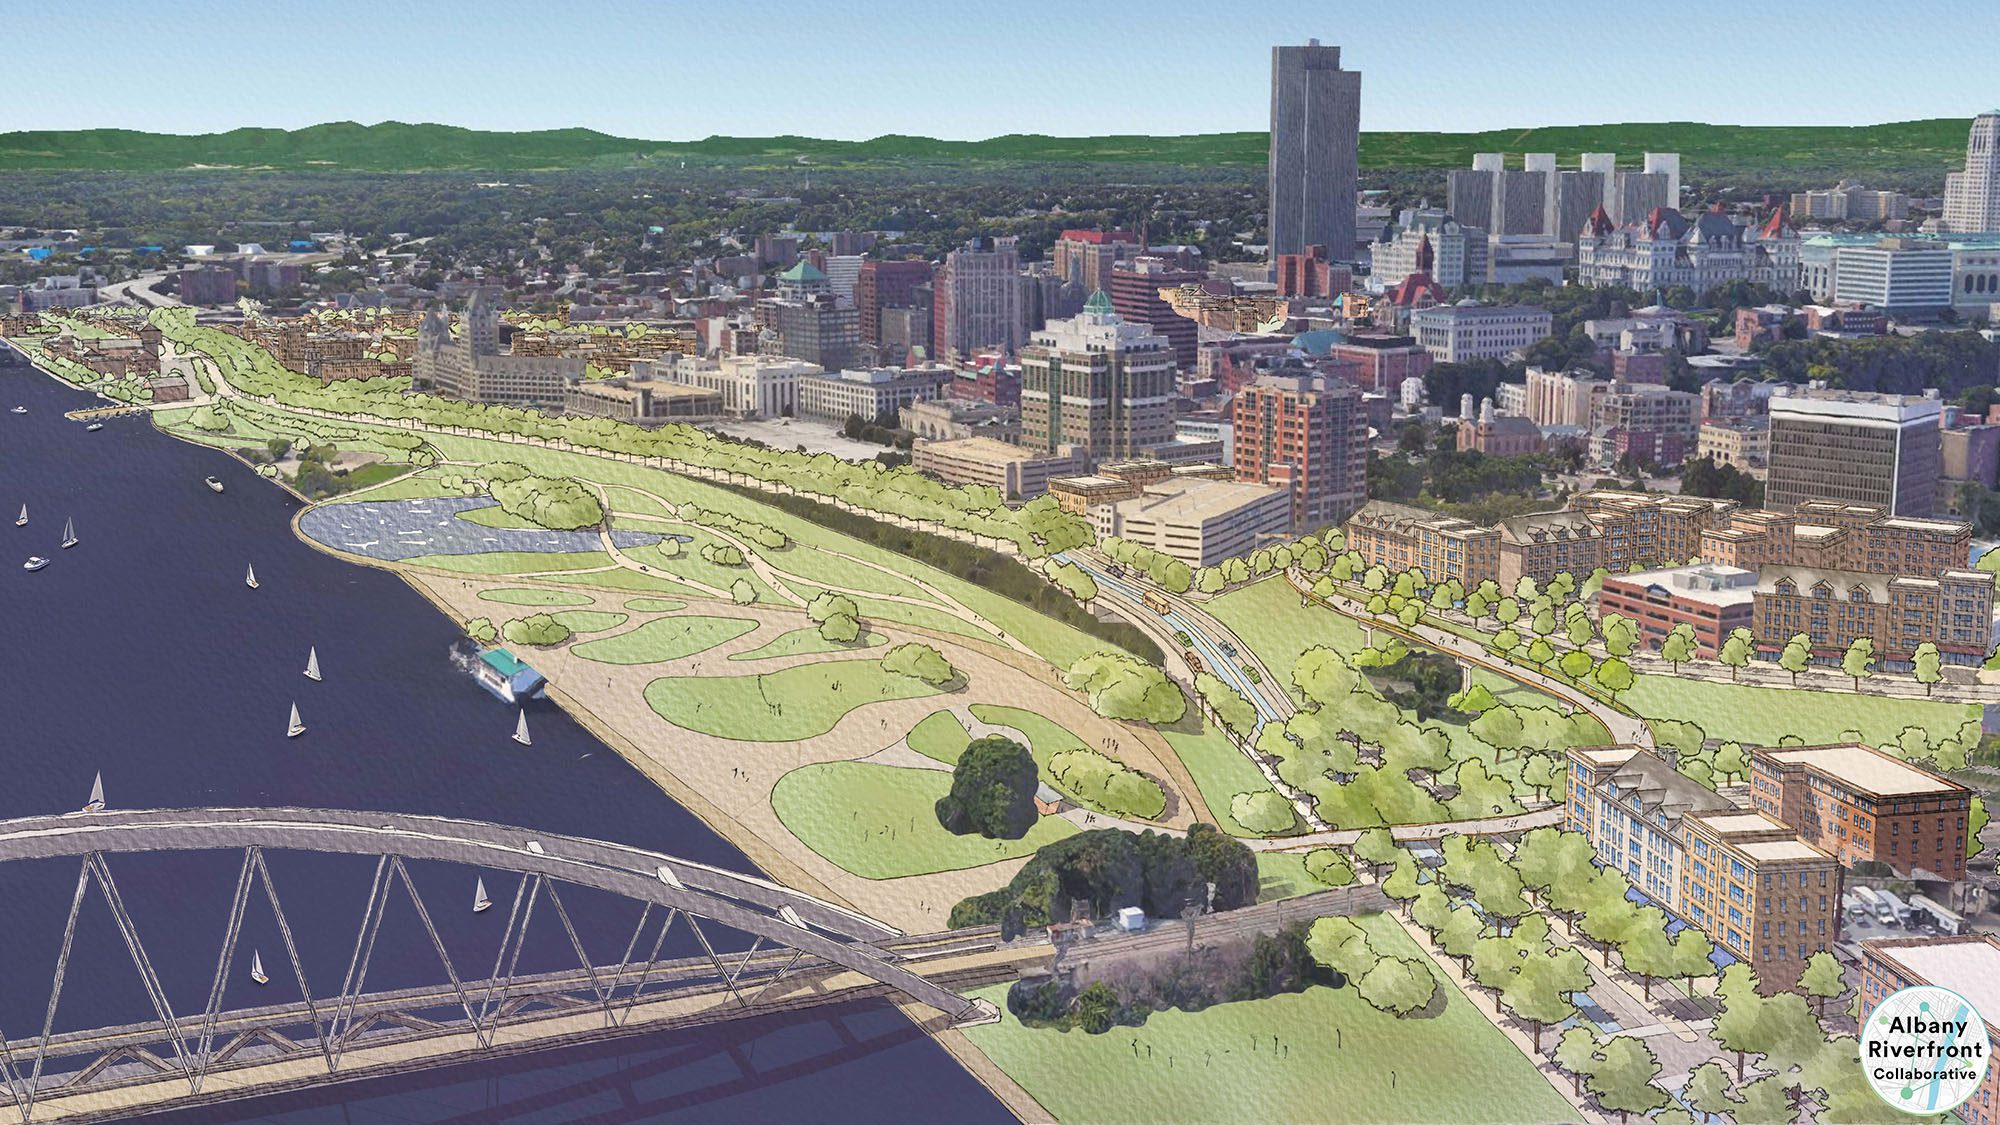 A grand vision to reconnect Albany with its waterfront